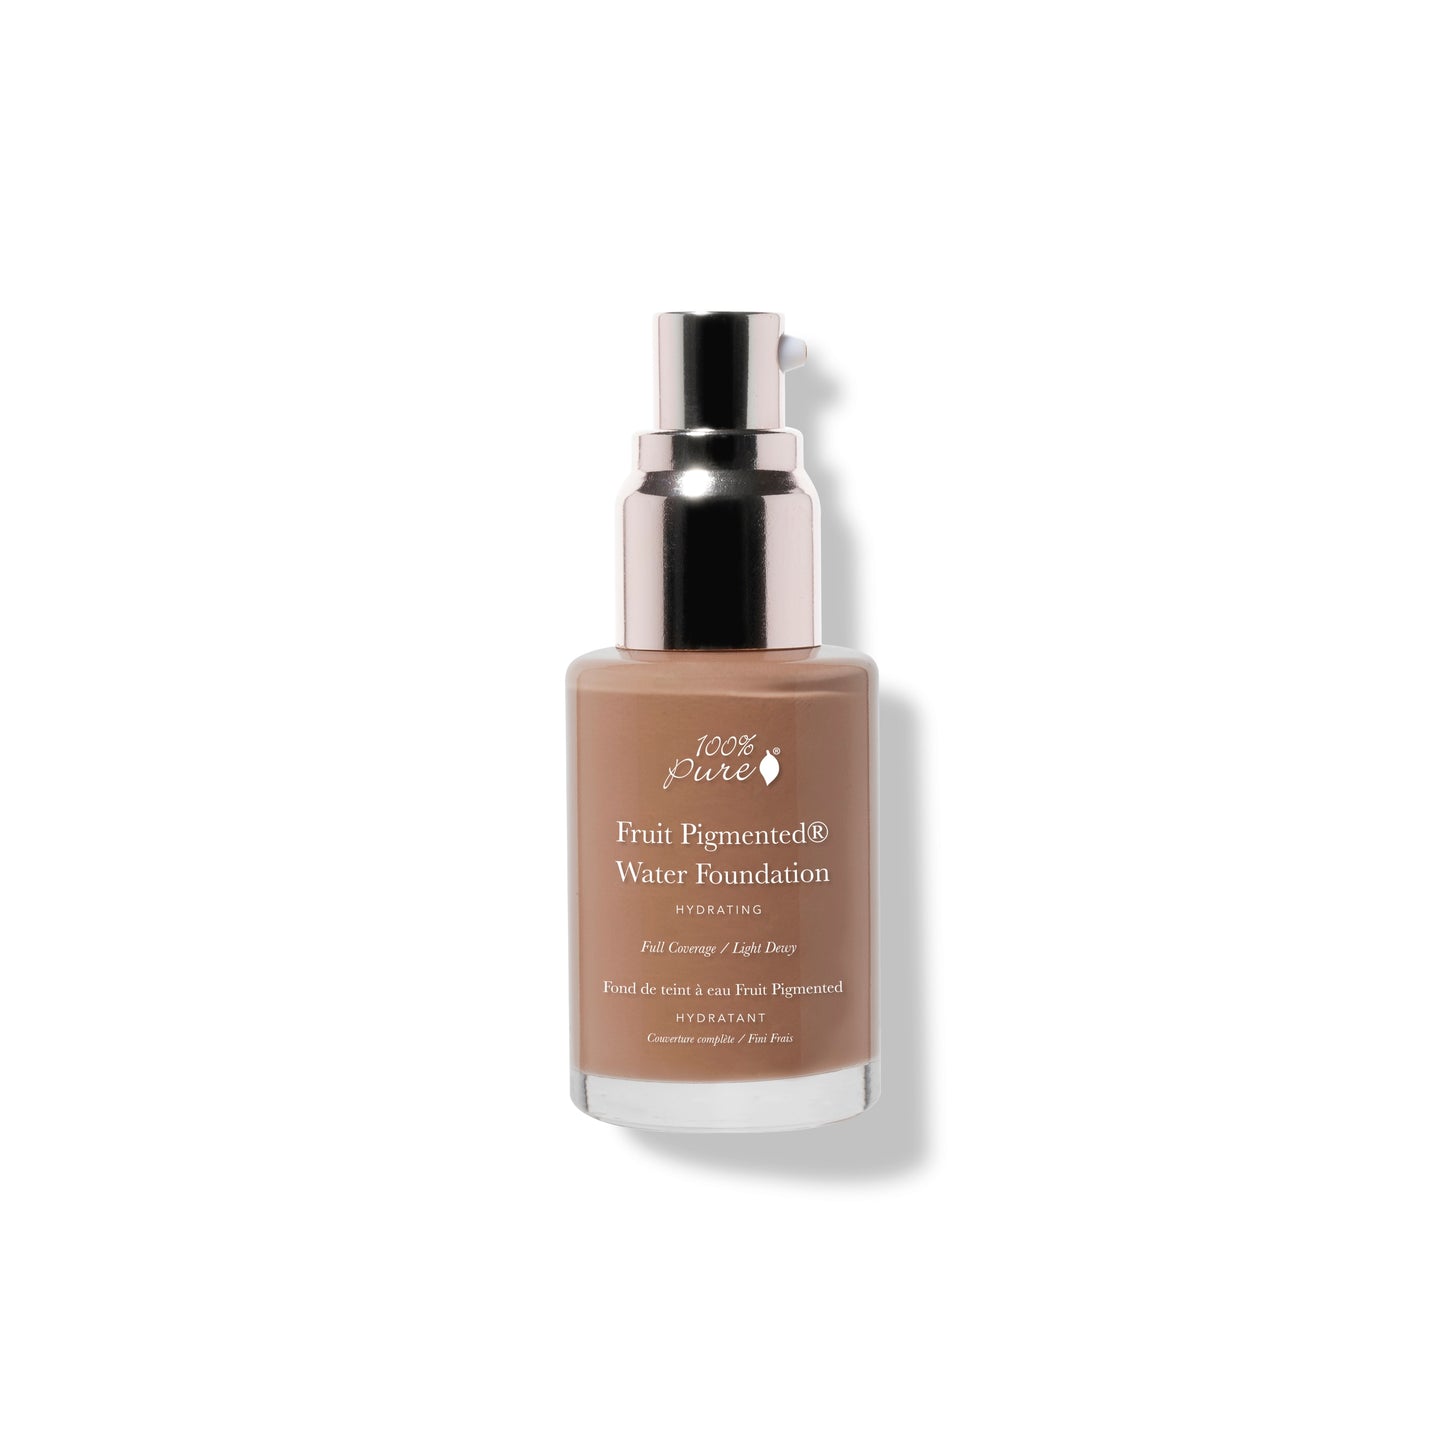 100% PURE Fruit Pigmented Full Coverage Water Foundation neutral 4.0